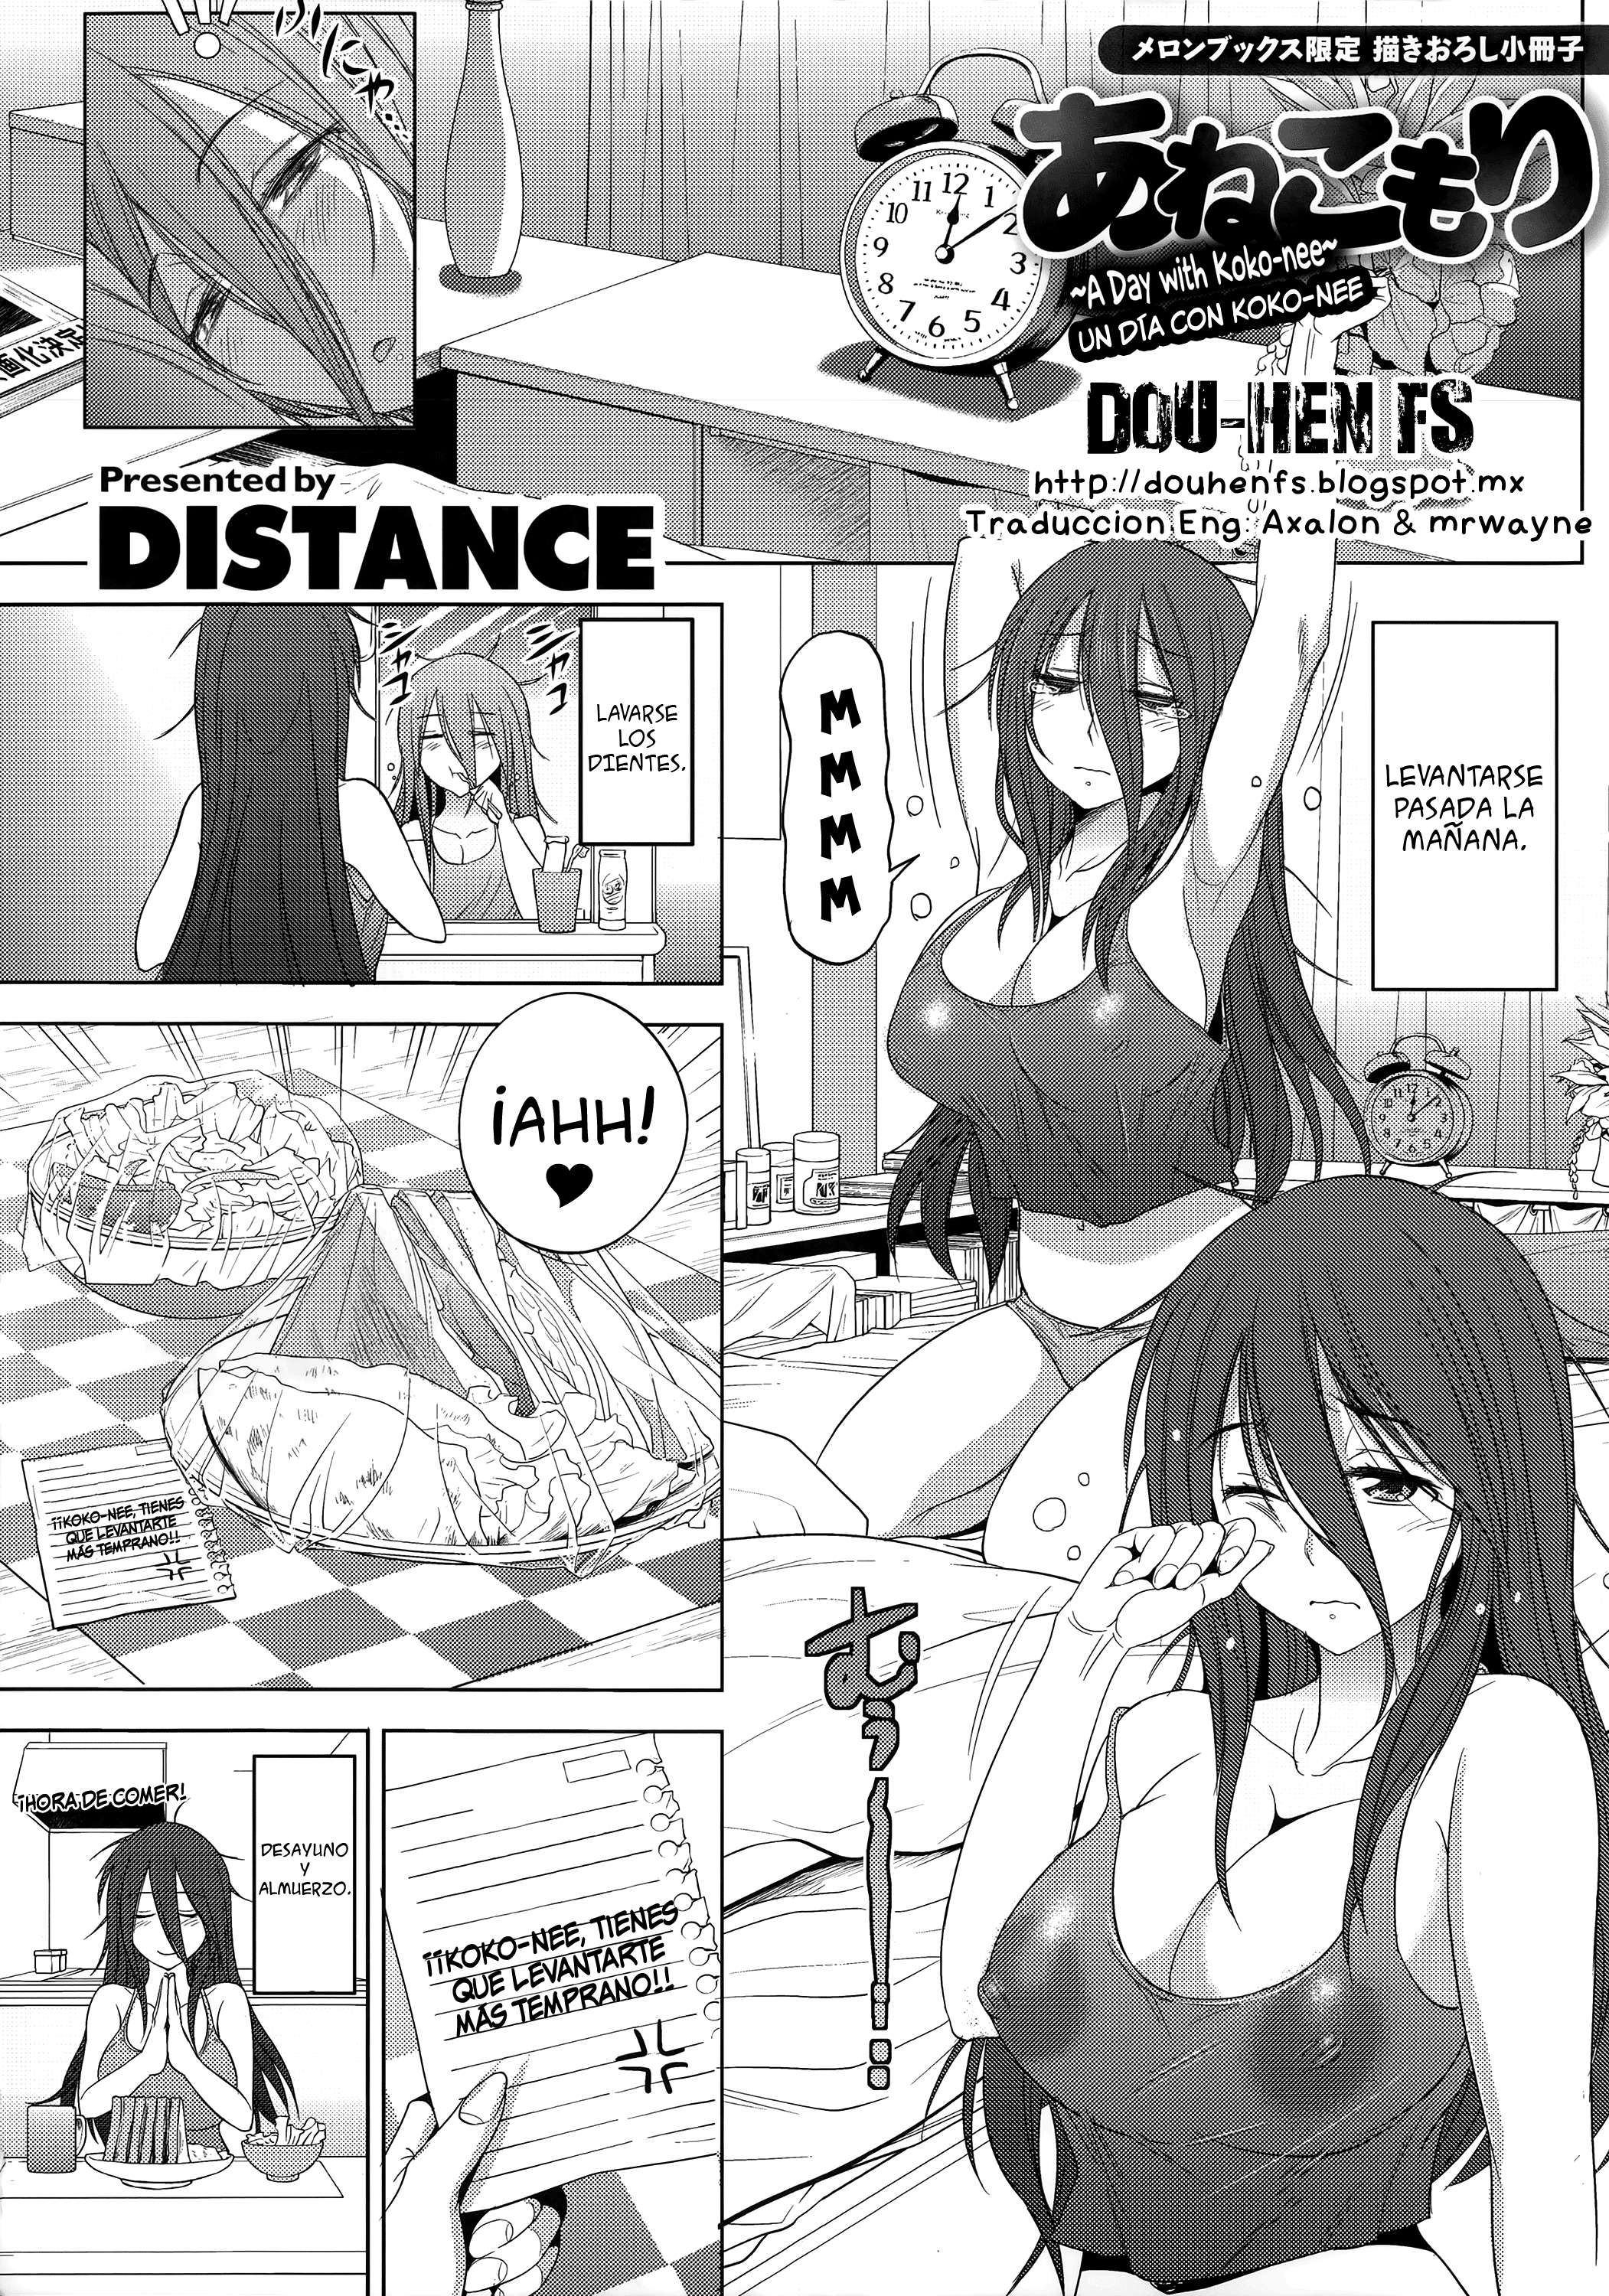 A Day with Koko-nee Chapter-1 - 0